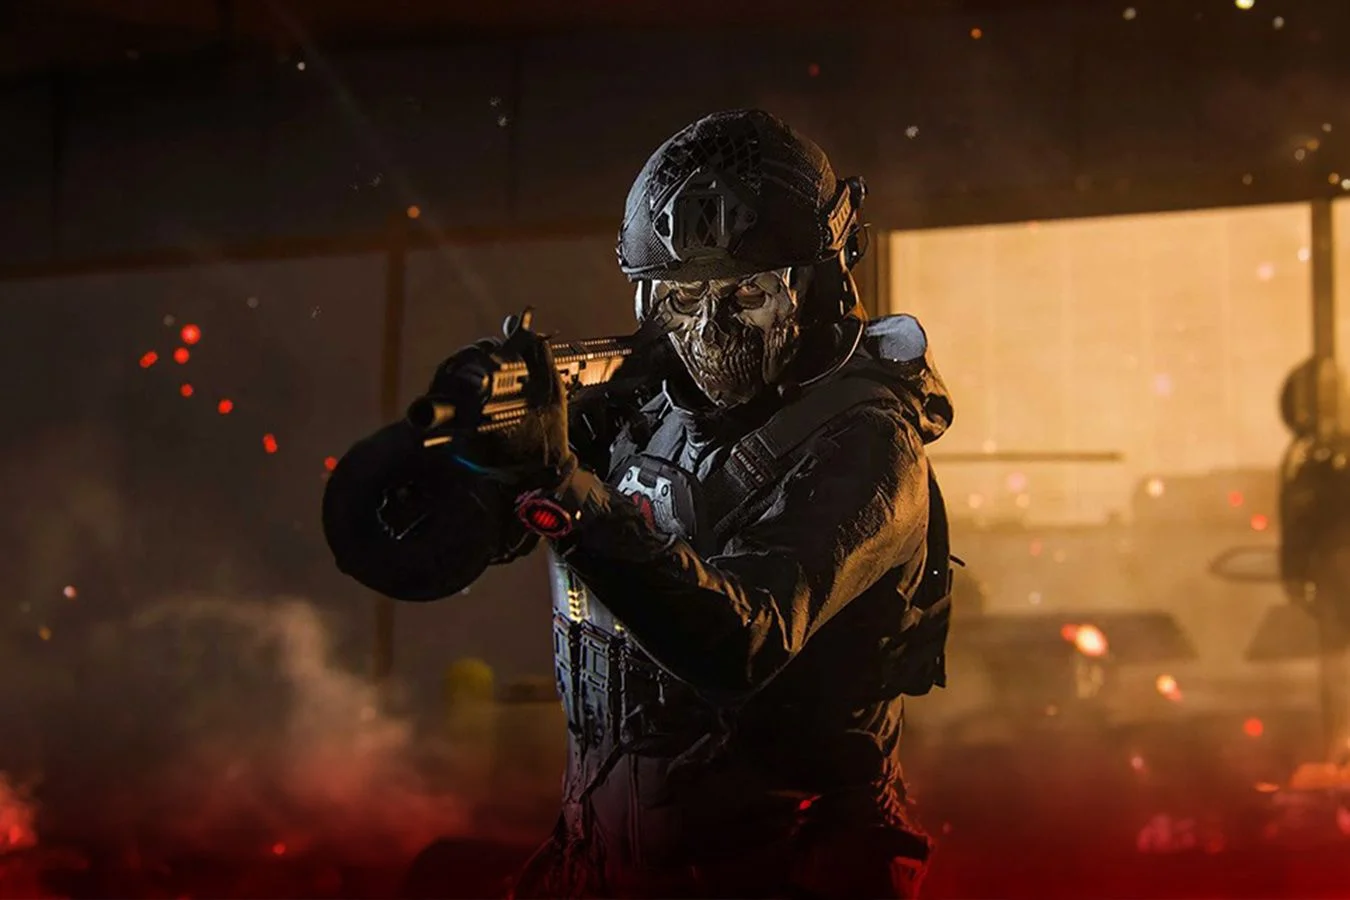 It will no longer be possible to swear in Call of Duty. Fine - ban